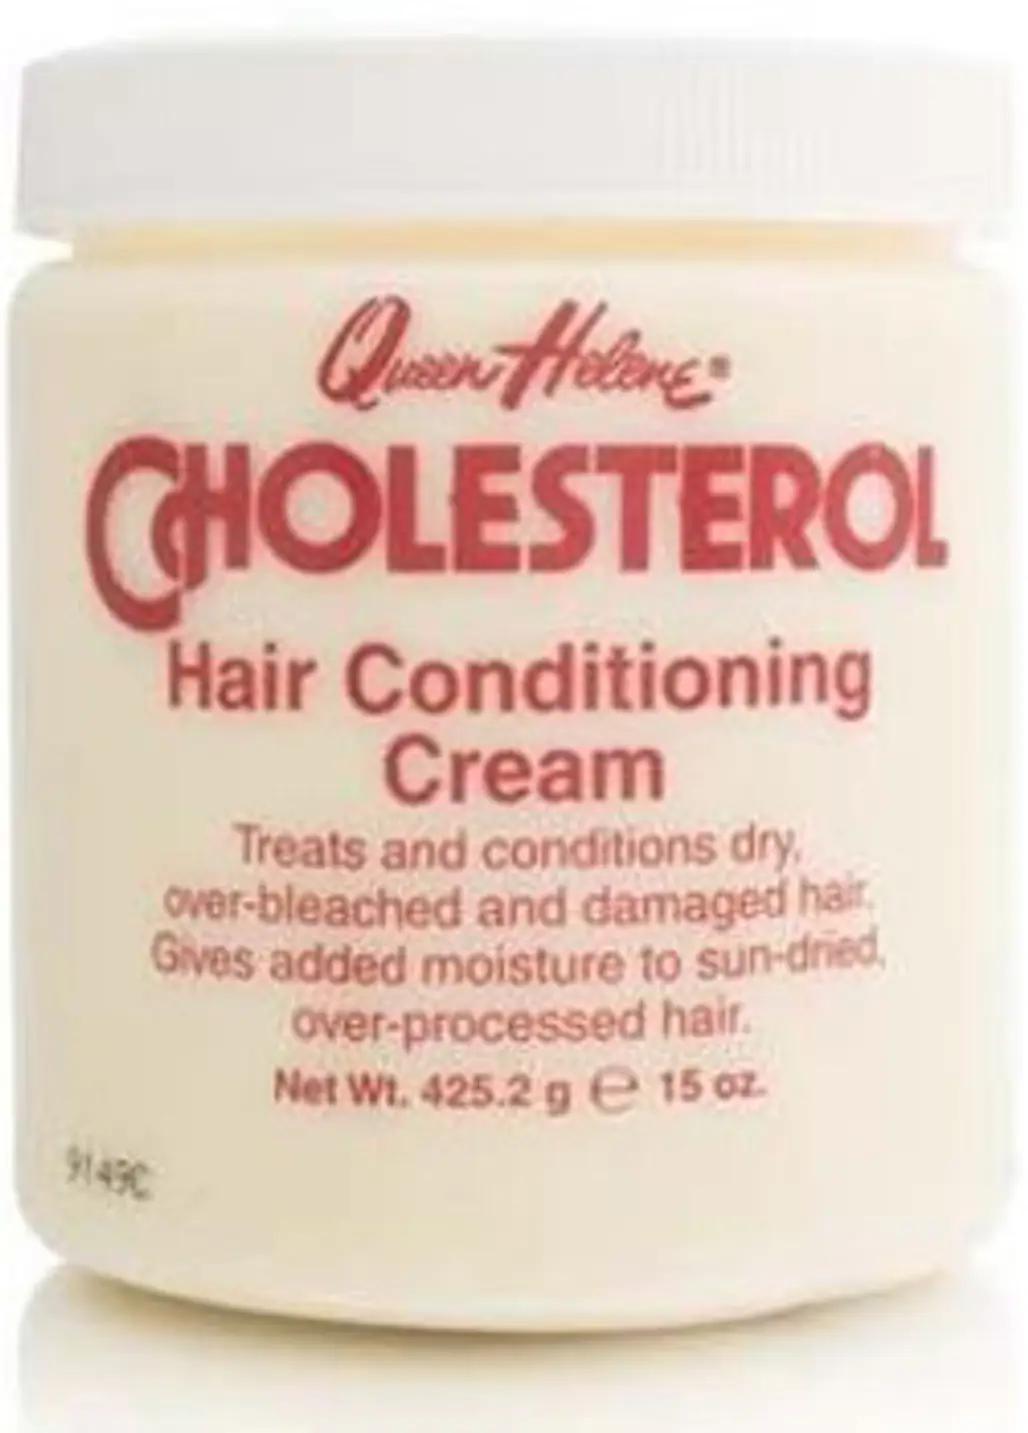 Queen Helene Cholesterol Hair Conditioning Creme